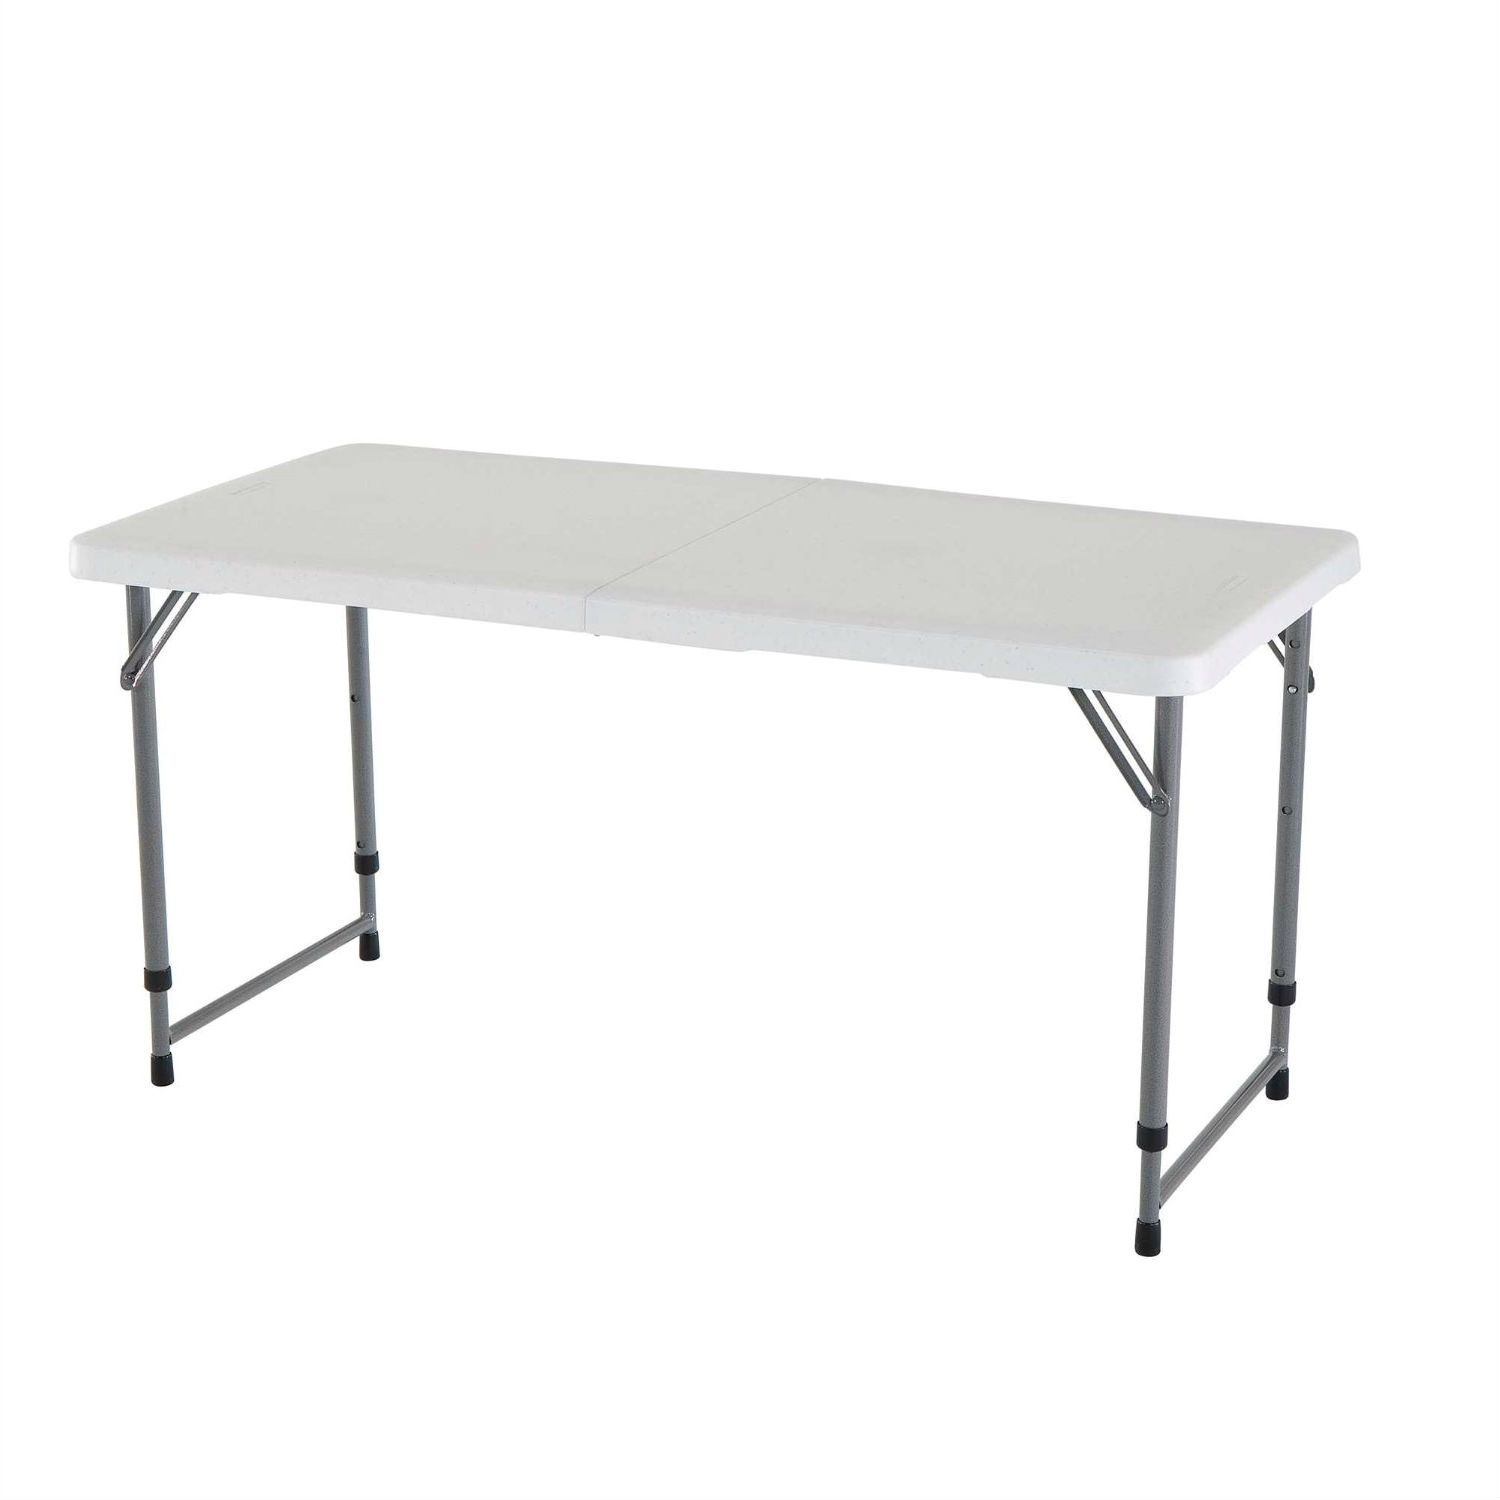 Adjustable Height White Hdpe Folding Table With Powder Coated Steel Frame Regarding White Wood Adjustable Reading Tables (View 11 of 15)